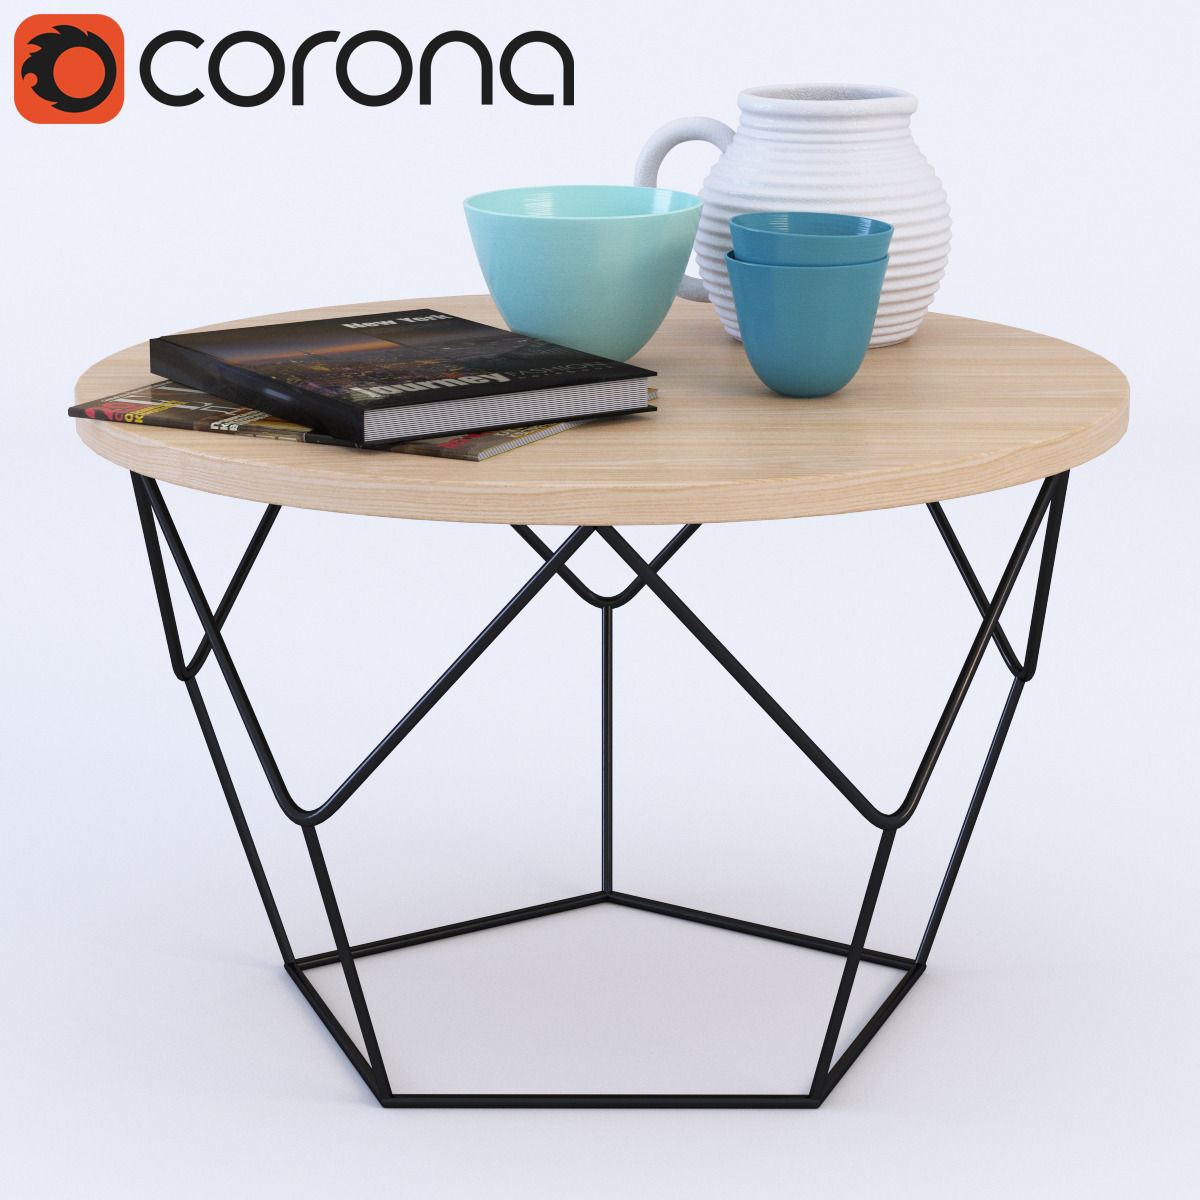 Origami Coffee Table West Elm West Elm Origami Coffee Table 3d Model